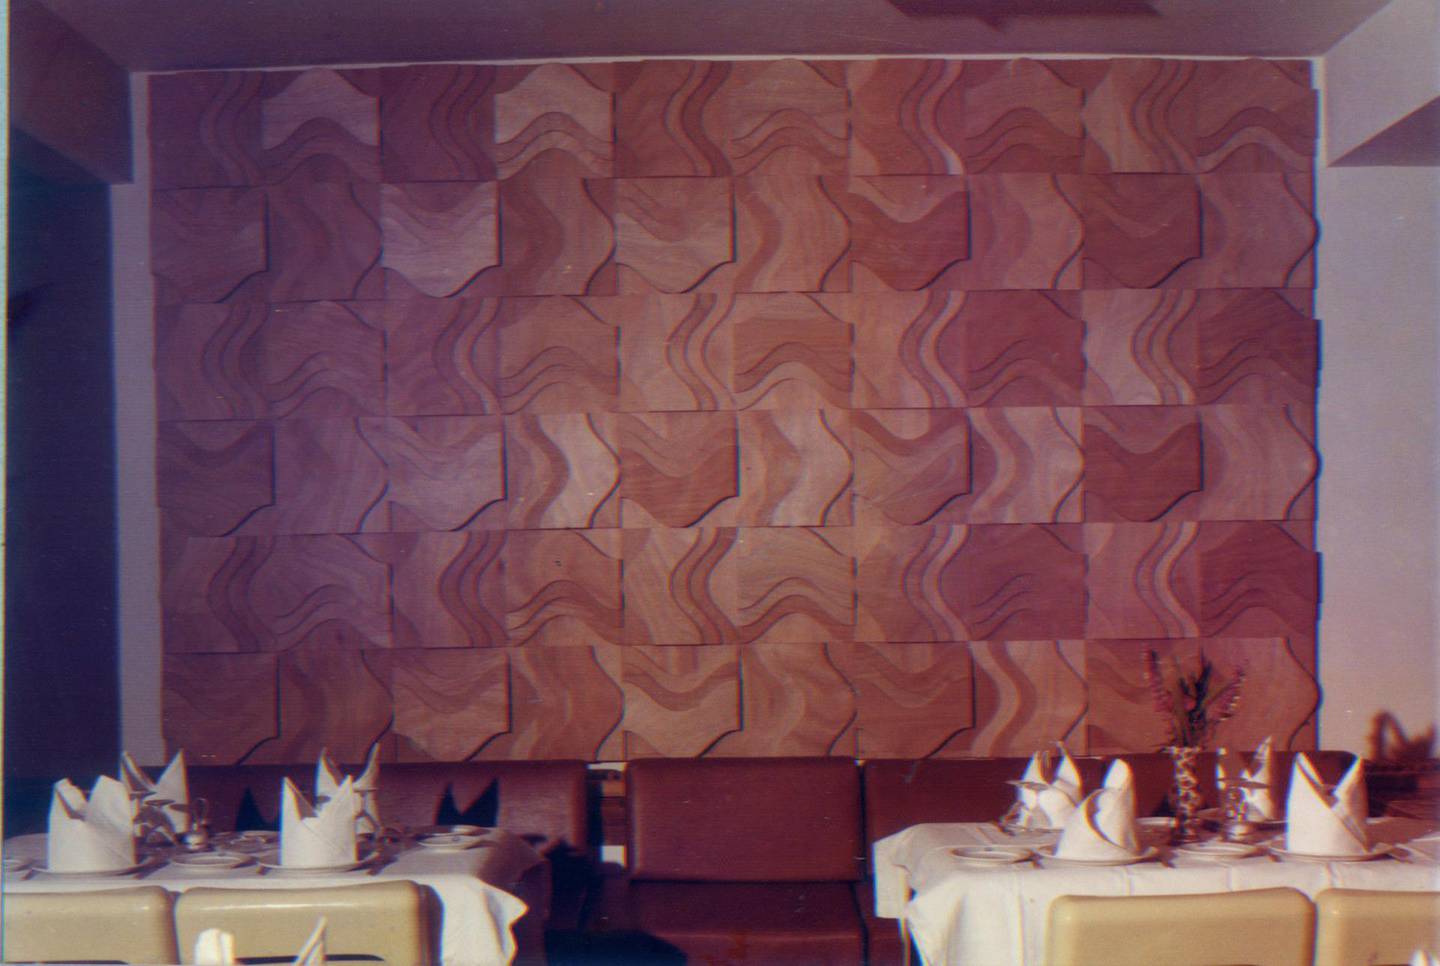 Wood wall panels designed by Mohammed Melehi for the Roses du Dades Hotel. Courtesy Faraoui & de Mazieres studio. Patrice and Pauline de Mazieres archives 